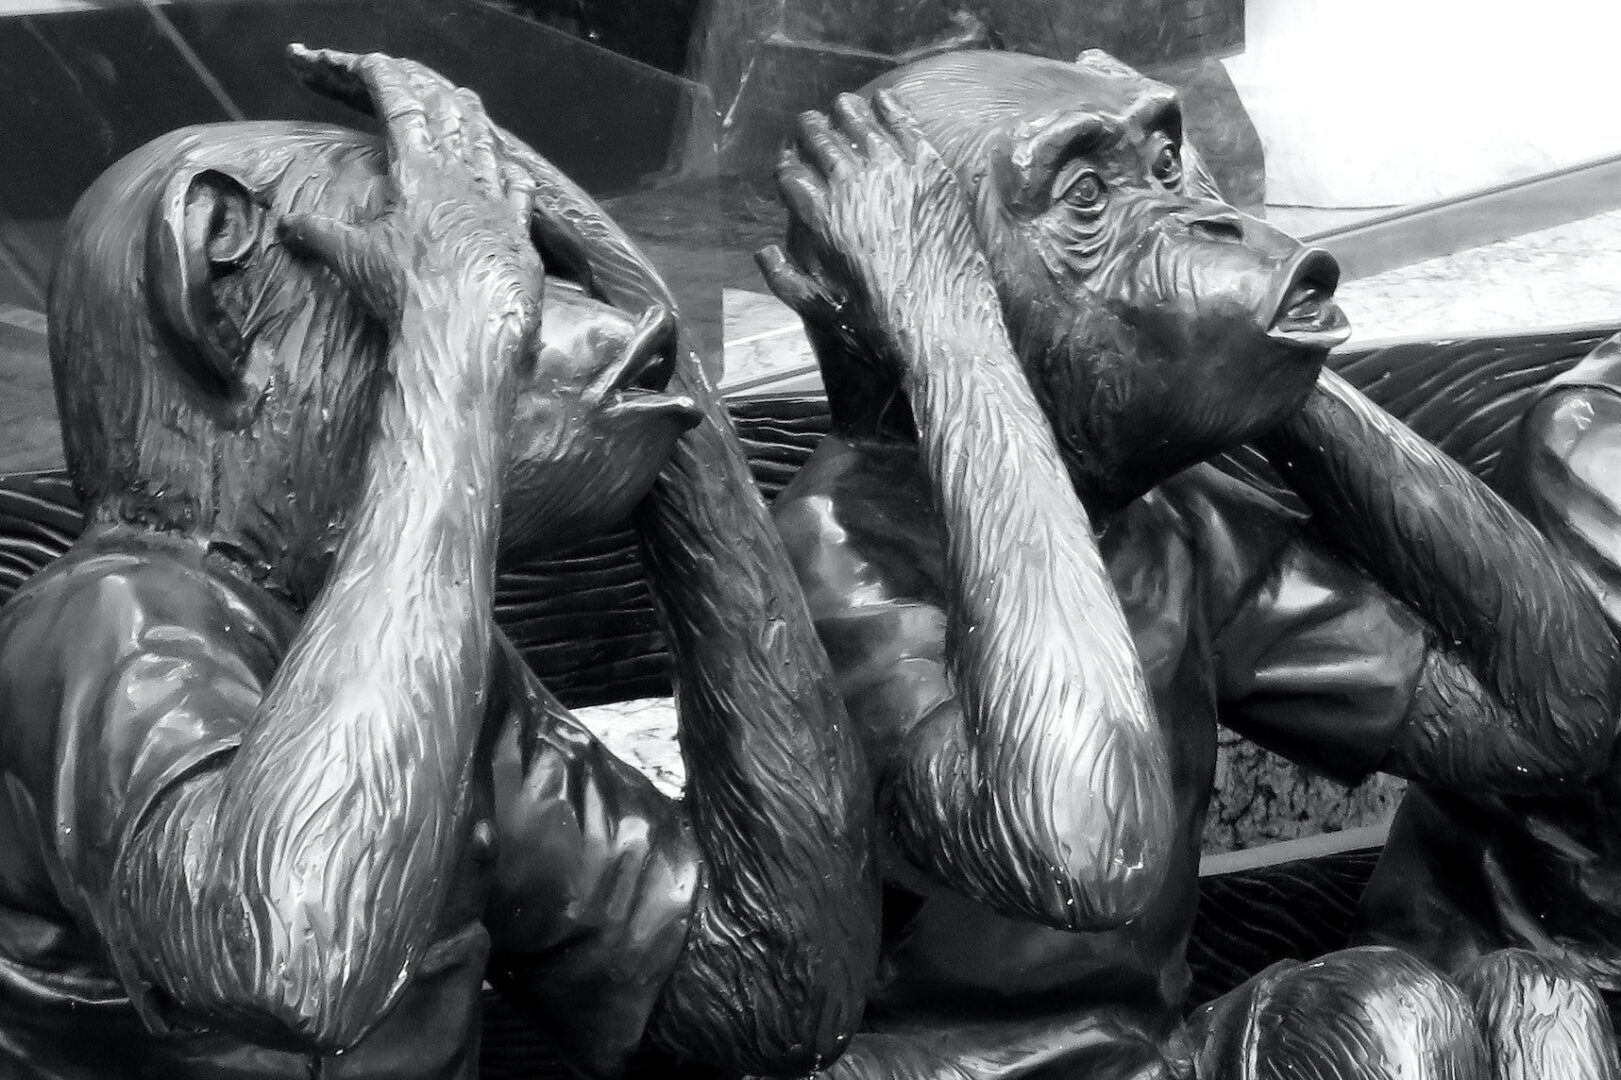 Monochrome image of sculptures depicting the "see no evil, hear no evil" concept with two gorillas.